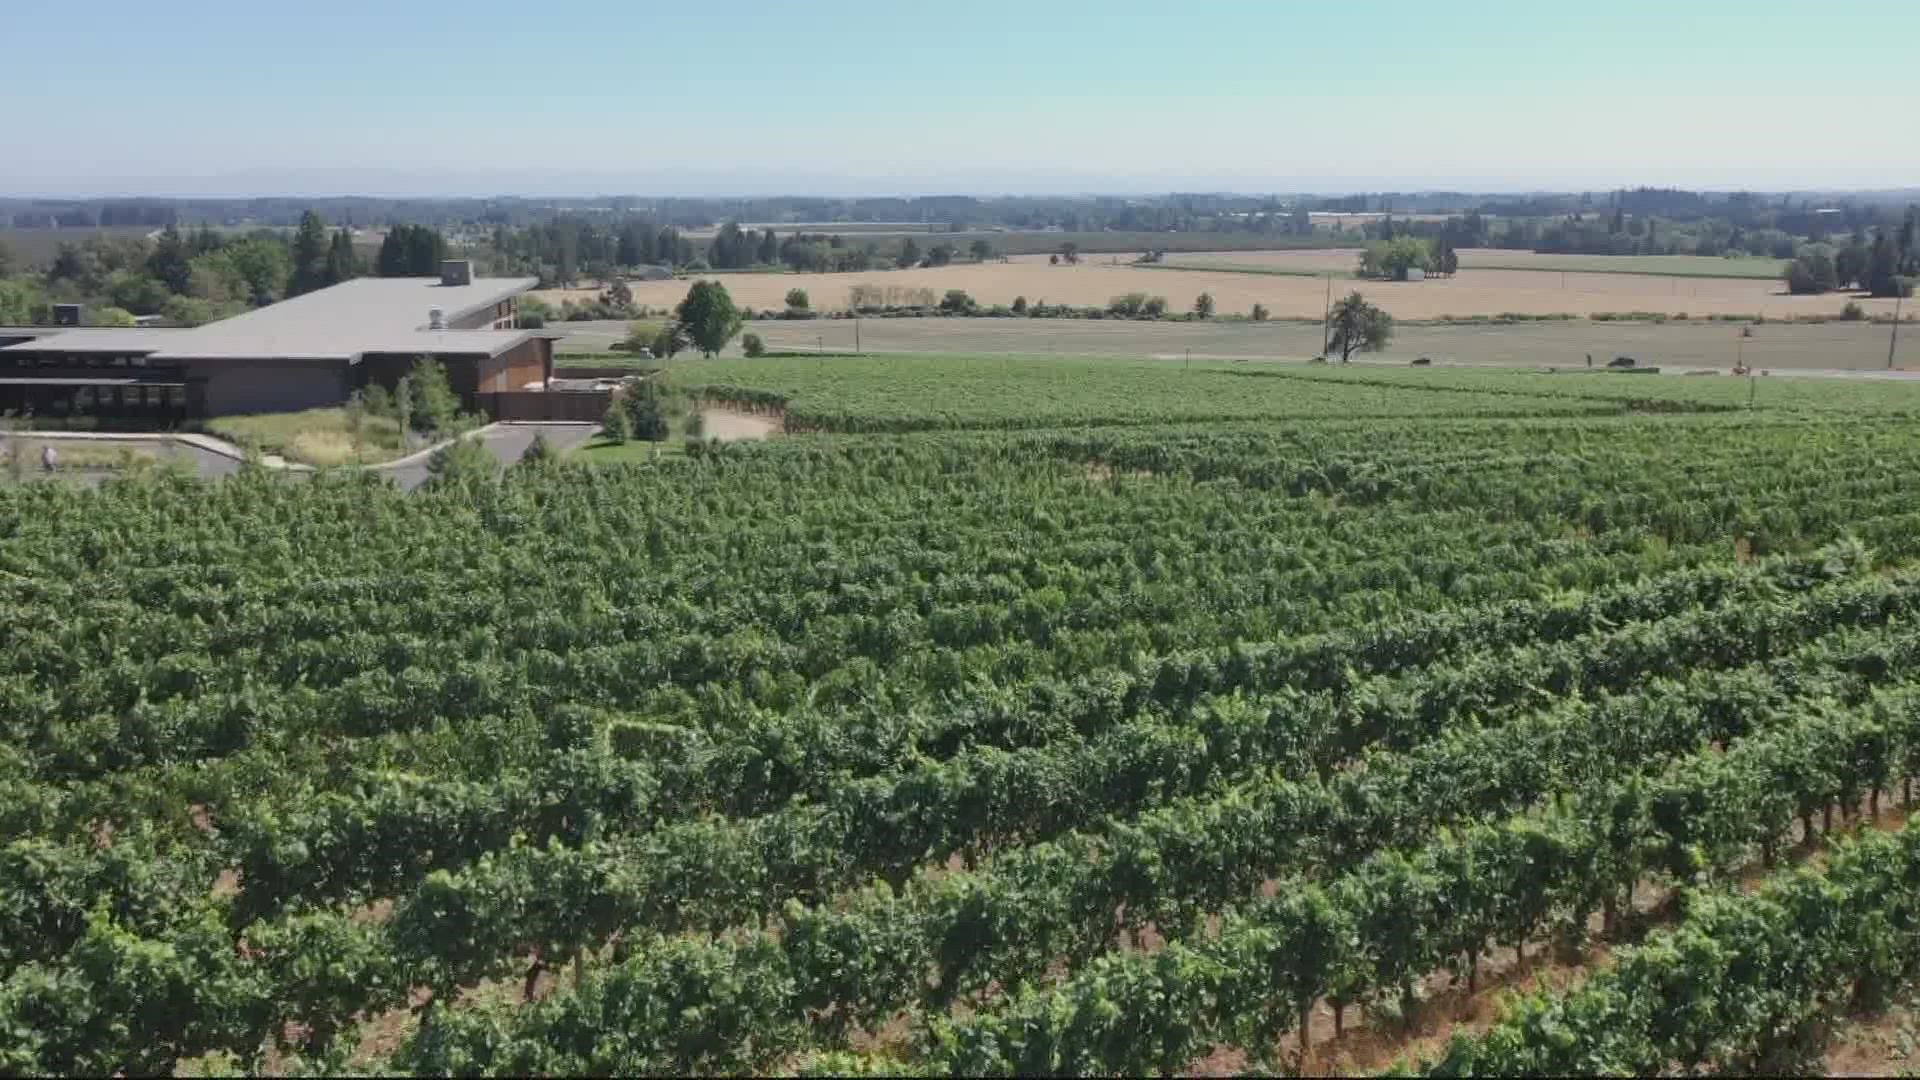 Domaine Willamette in the Dundee Hills aims to bring sparkling wine to the table while making a positive impact on the environment. It's set to open on Sept. 19.